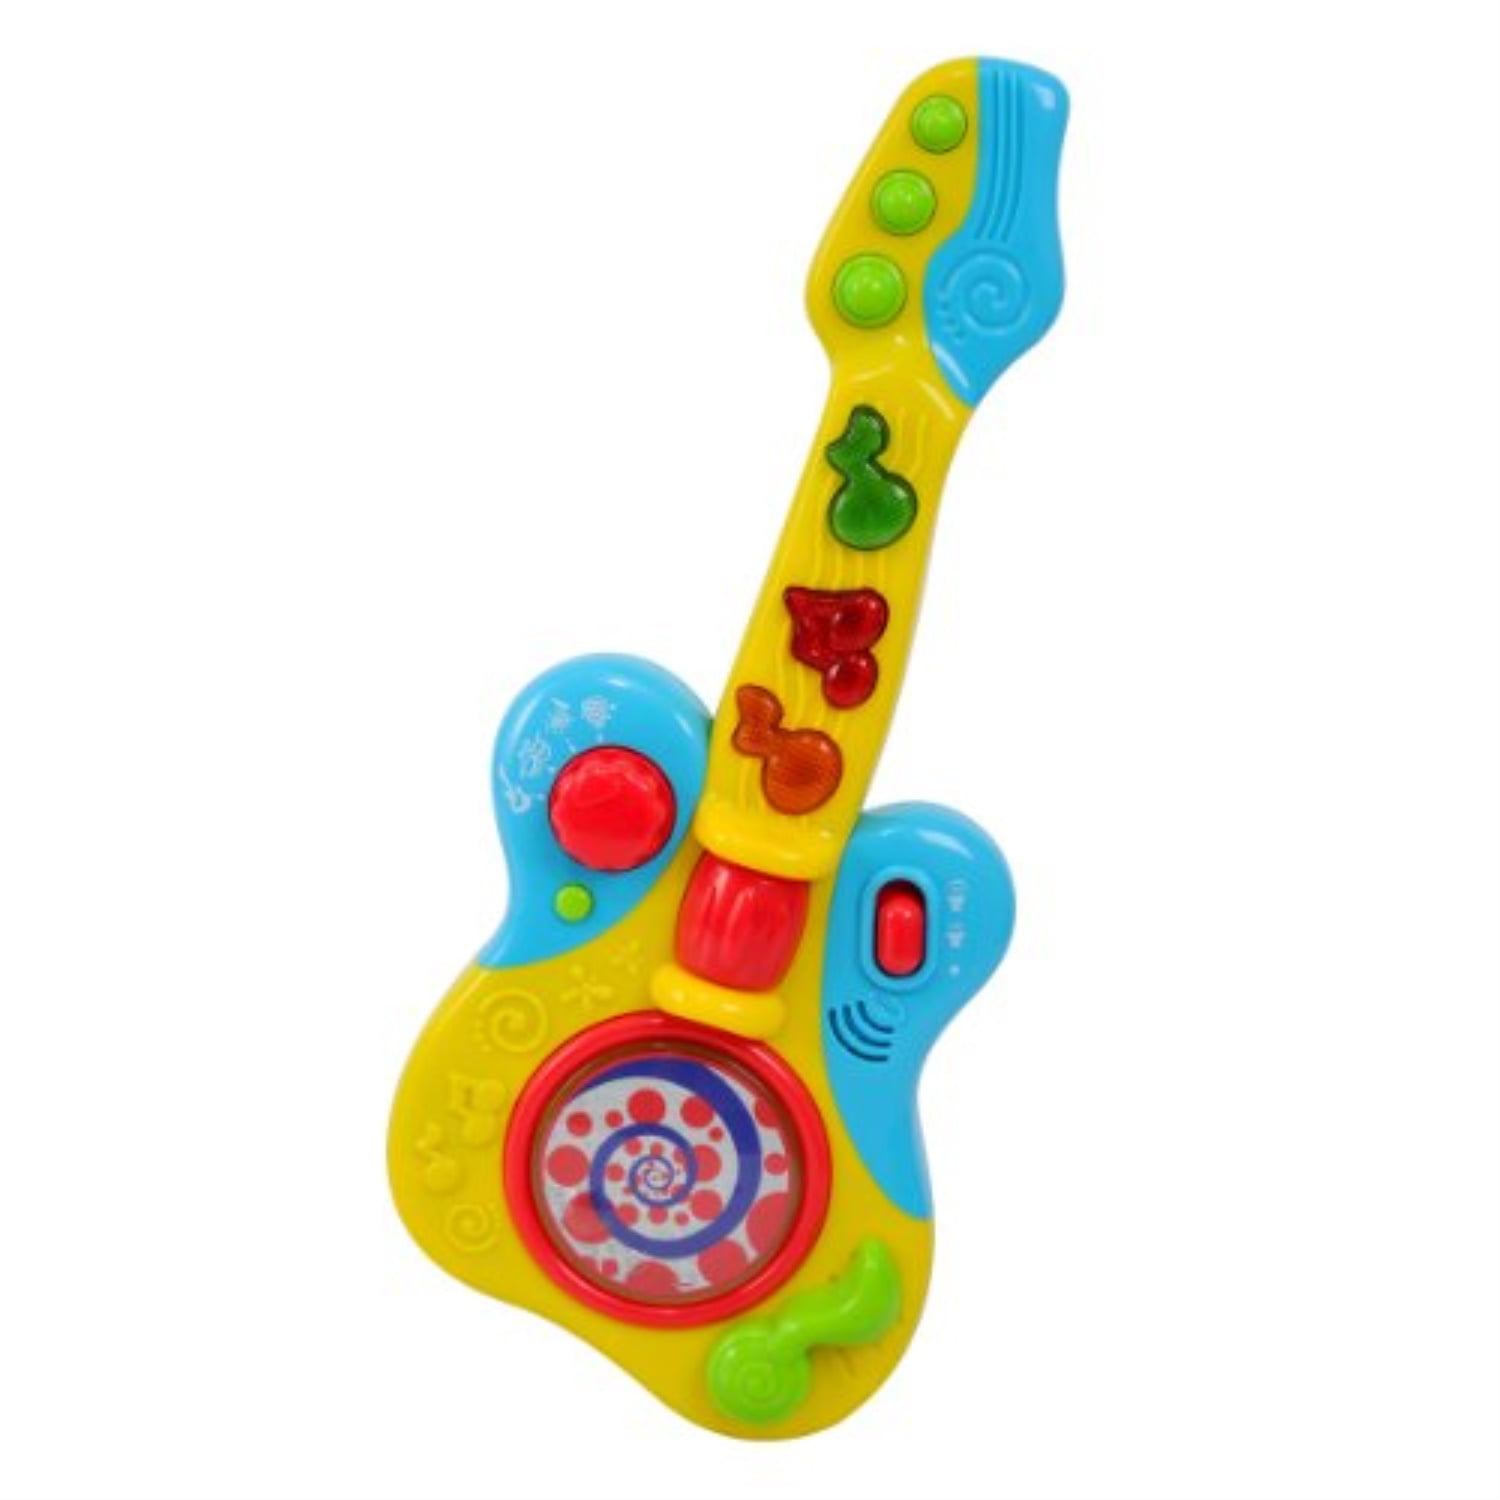 PlayGo Toys TOYSGB007J65RC4 playgo tiny musicians guitar baby toy